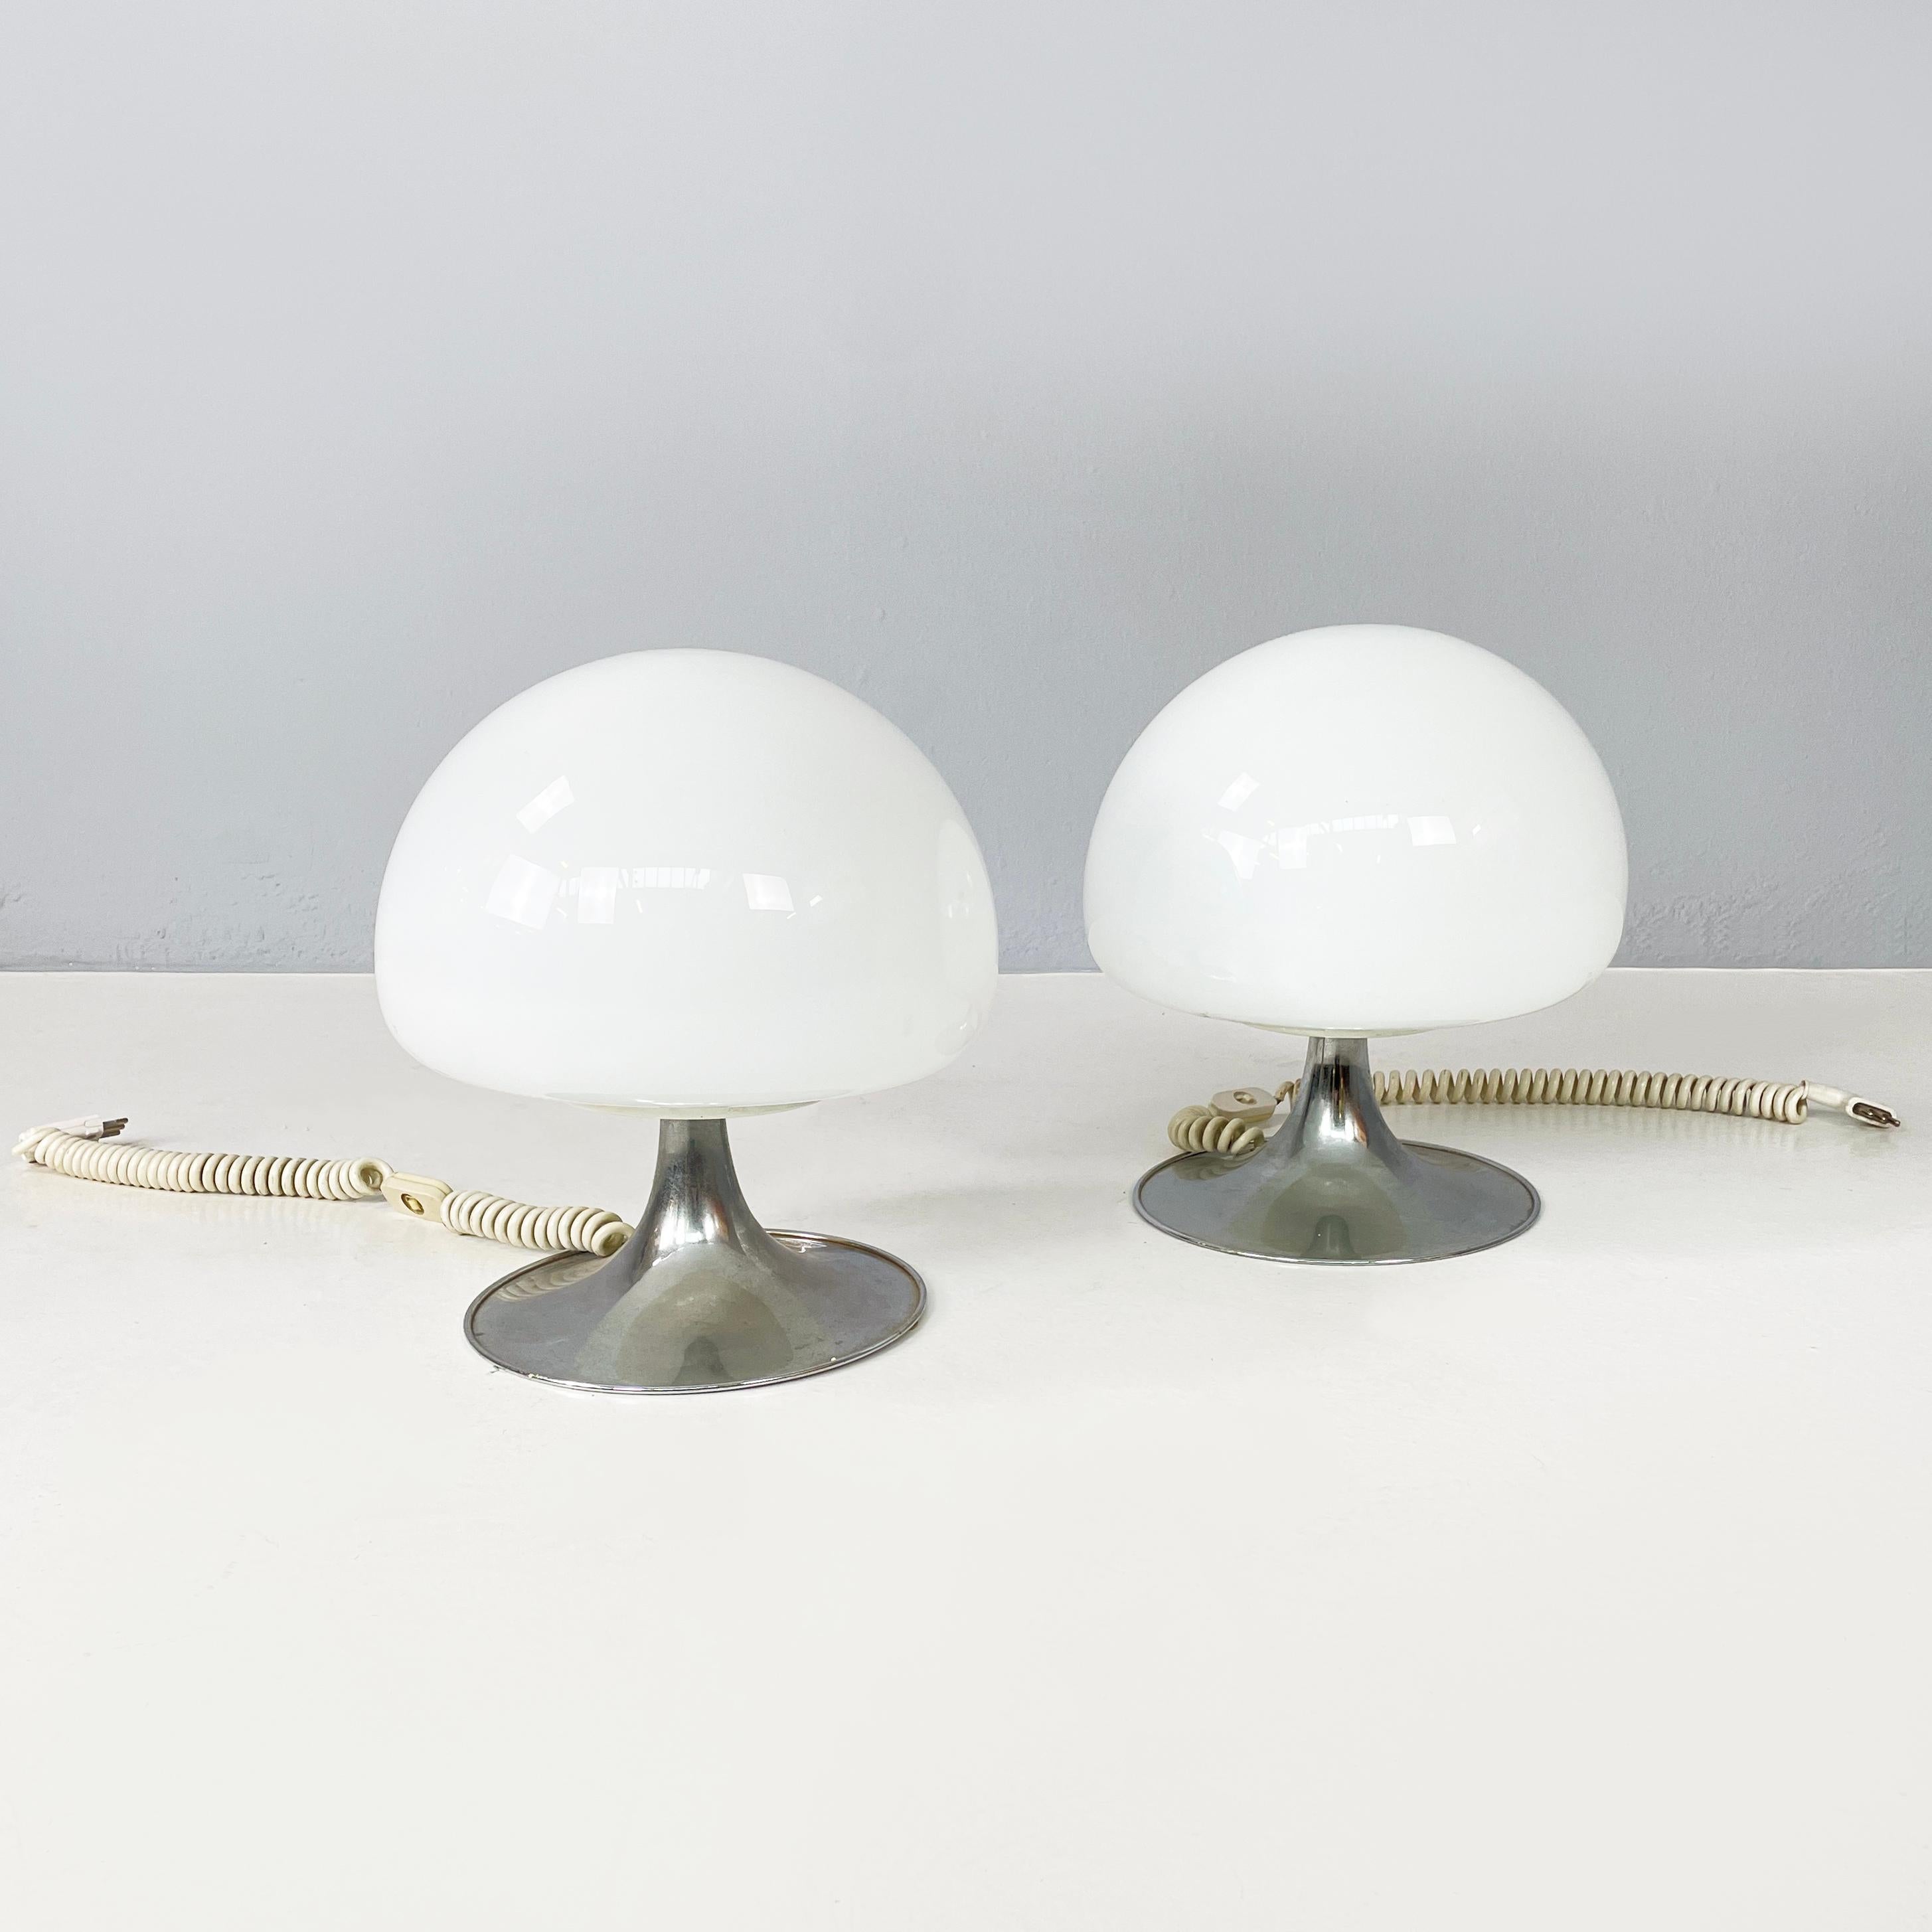 Italian mid-century modern Table lamps Mushroom by Goffredo Reggiani for Reggiani, 1970s
Pair of table lamps mod. Mushroom with mushroom-shaped diffuser in opal glass. The round base is in chromed steel. These lamps are perfect as a bedside lamp or